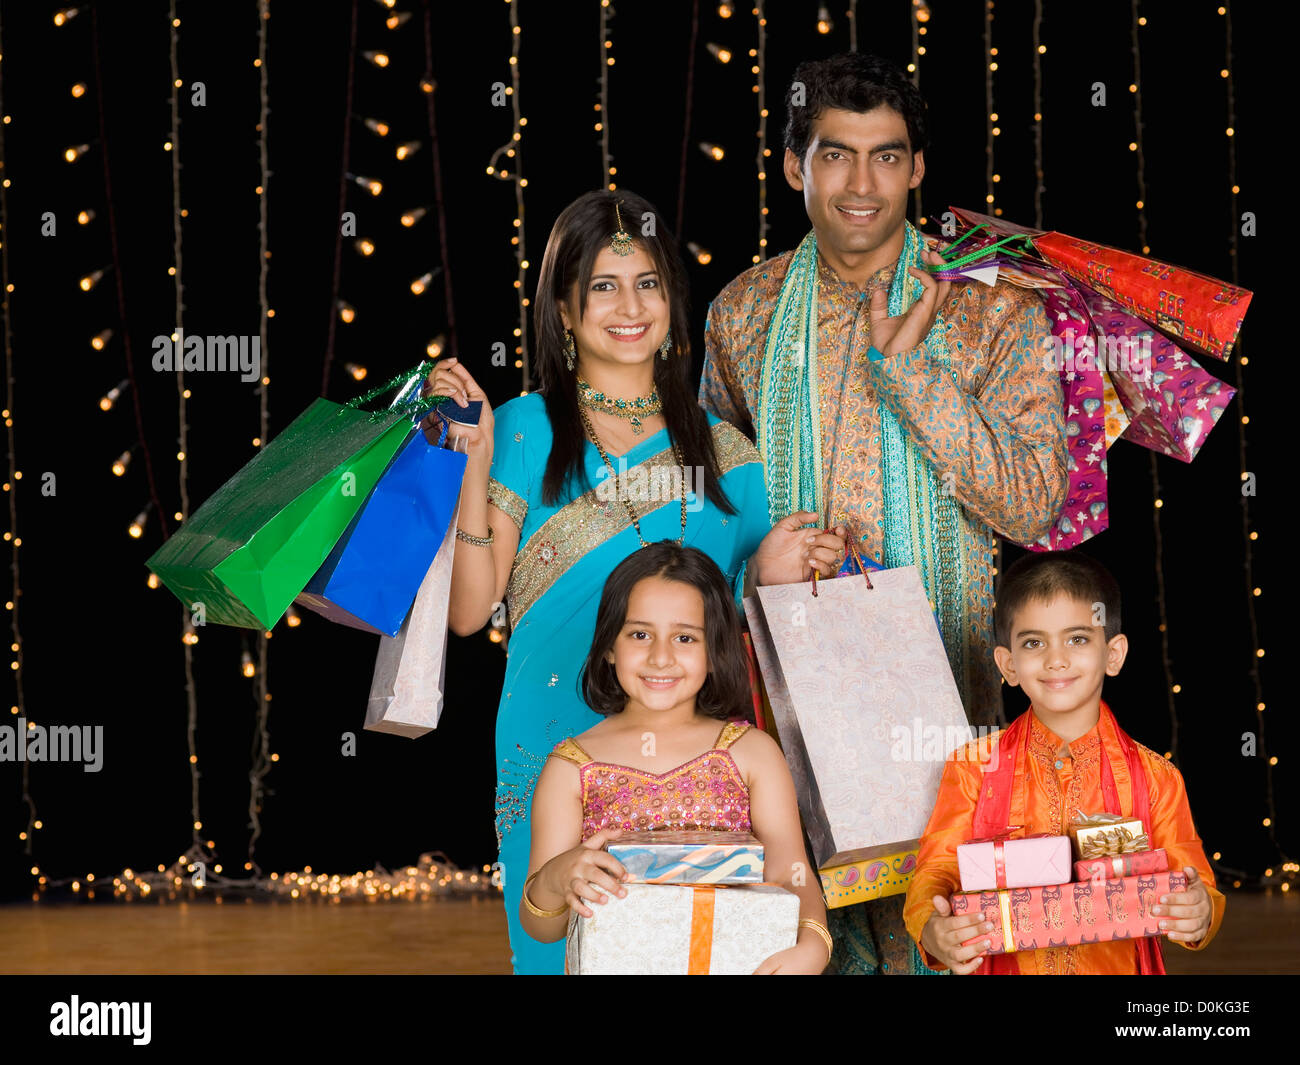 Family with shopping bags in front of Diwali decorations Stock Photo